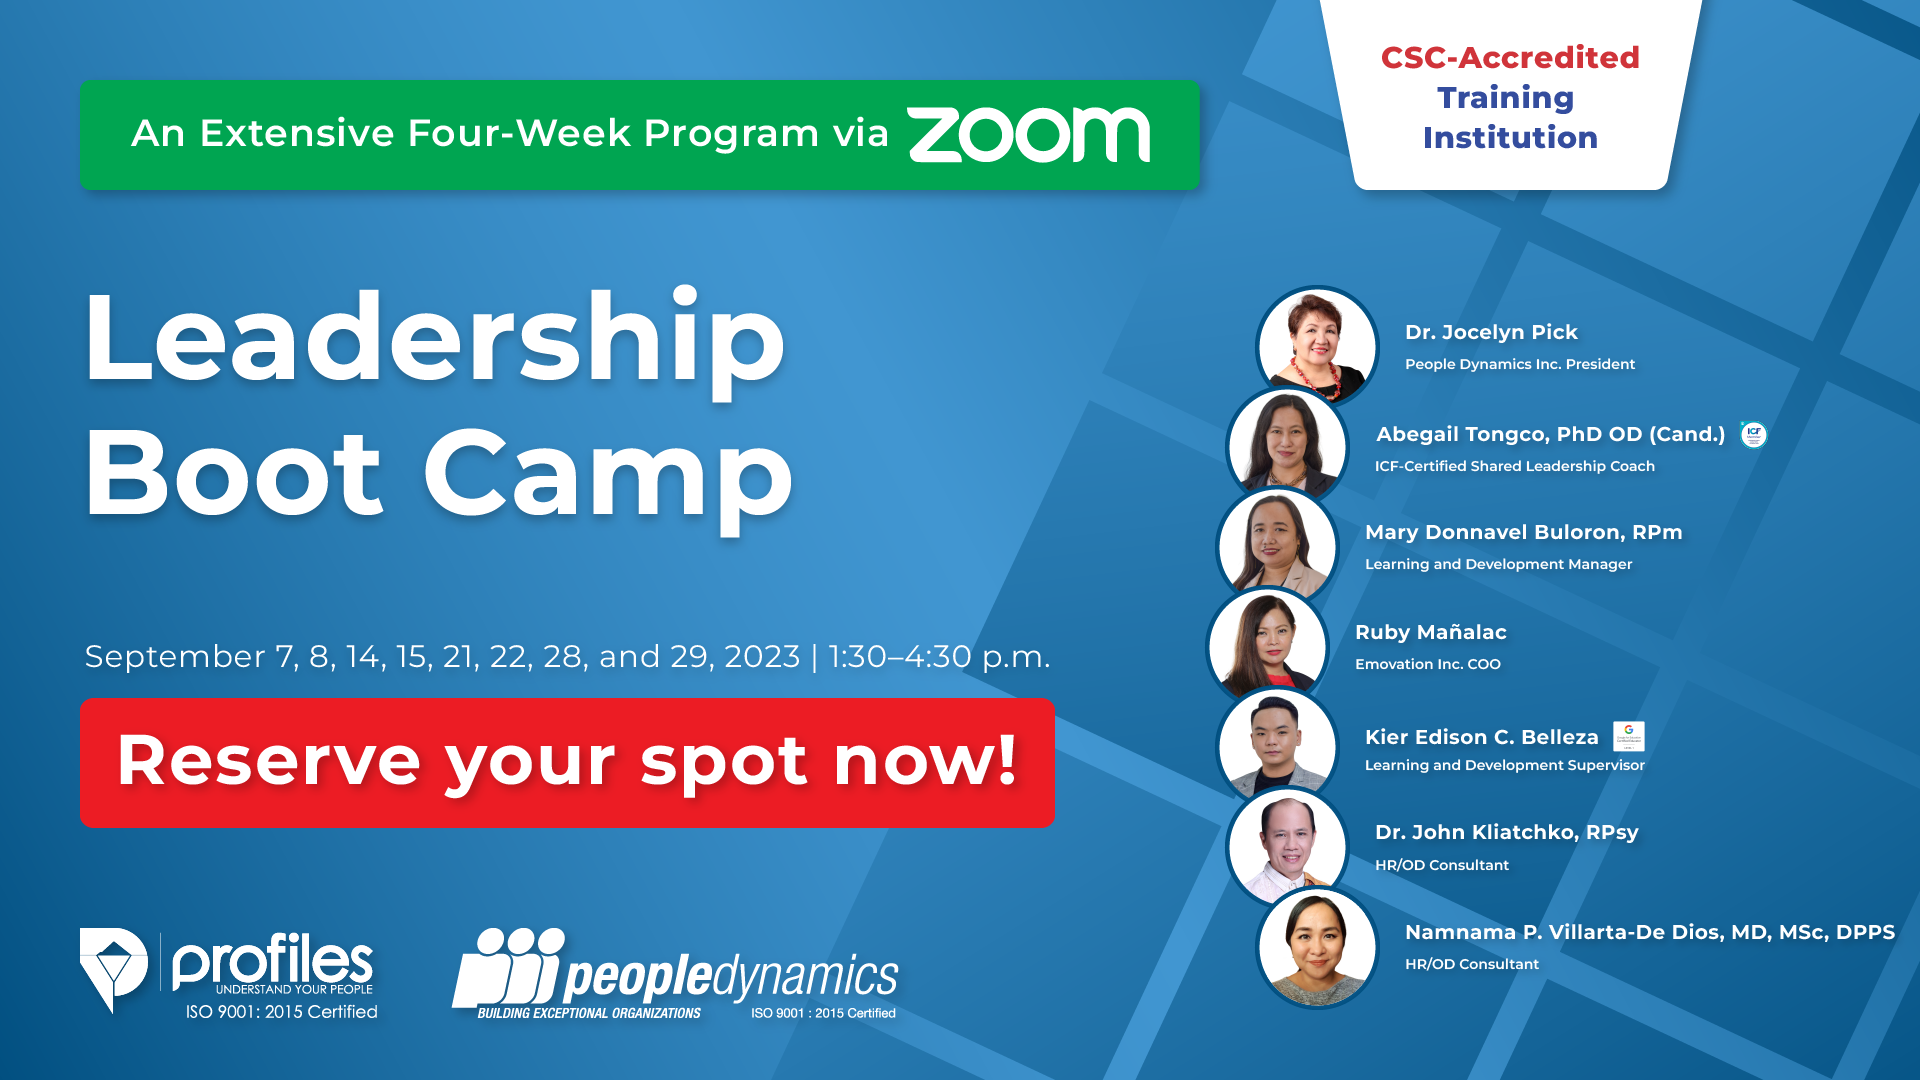 Leadership Boot Camp: A Training Series for Public Servants